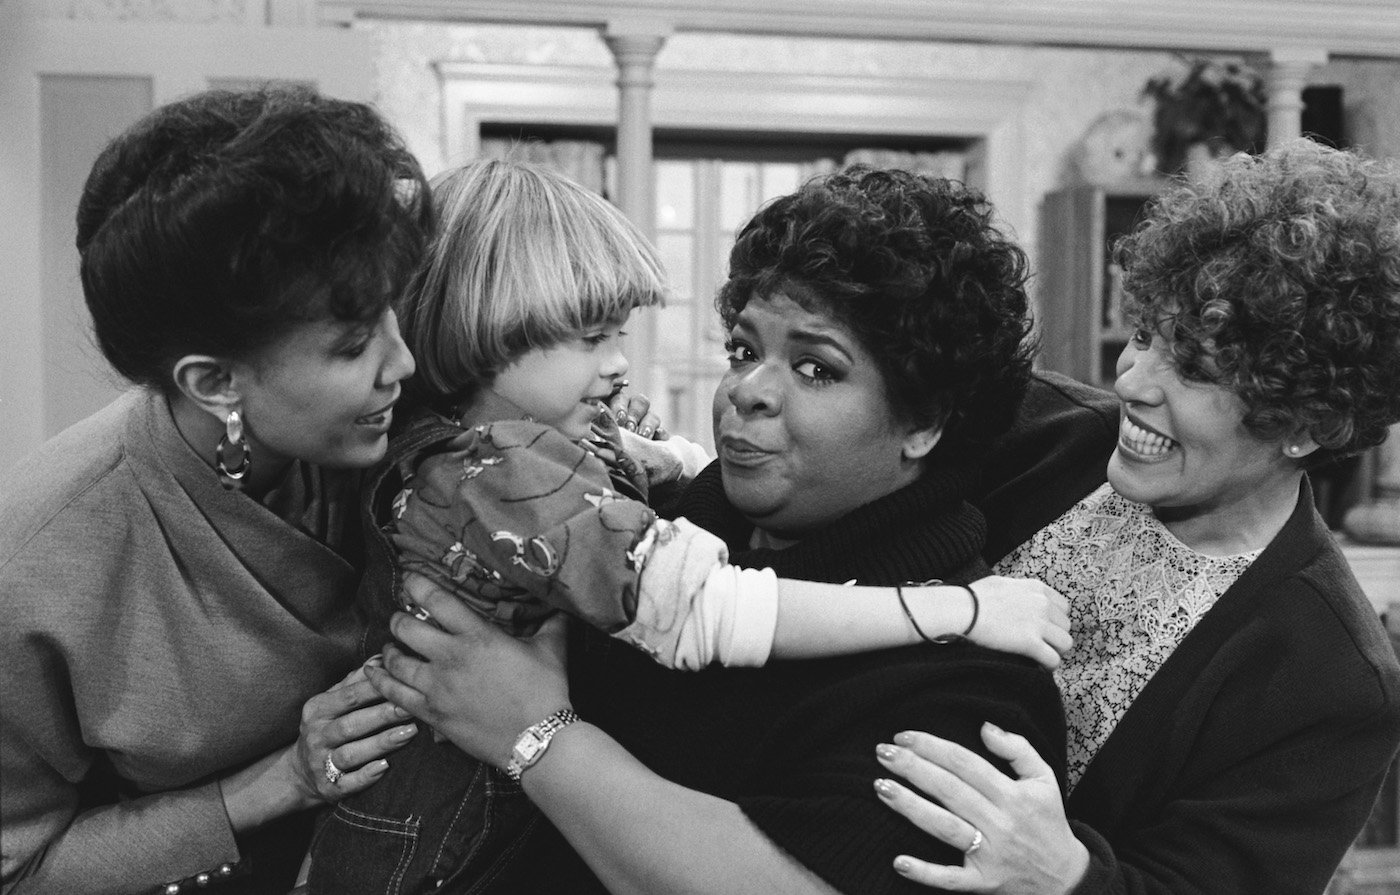 Actors Telma Hopkins, Matthew Lawrence, and Nell Carter on the TV show 'Gimme a Break' in January 1987